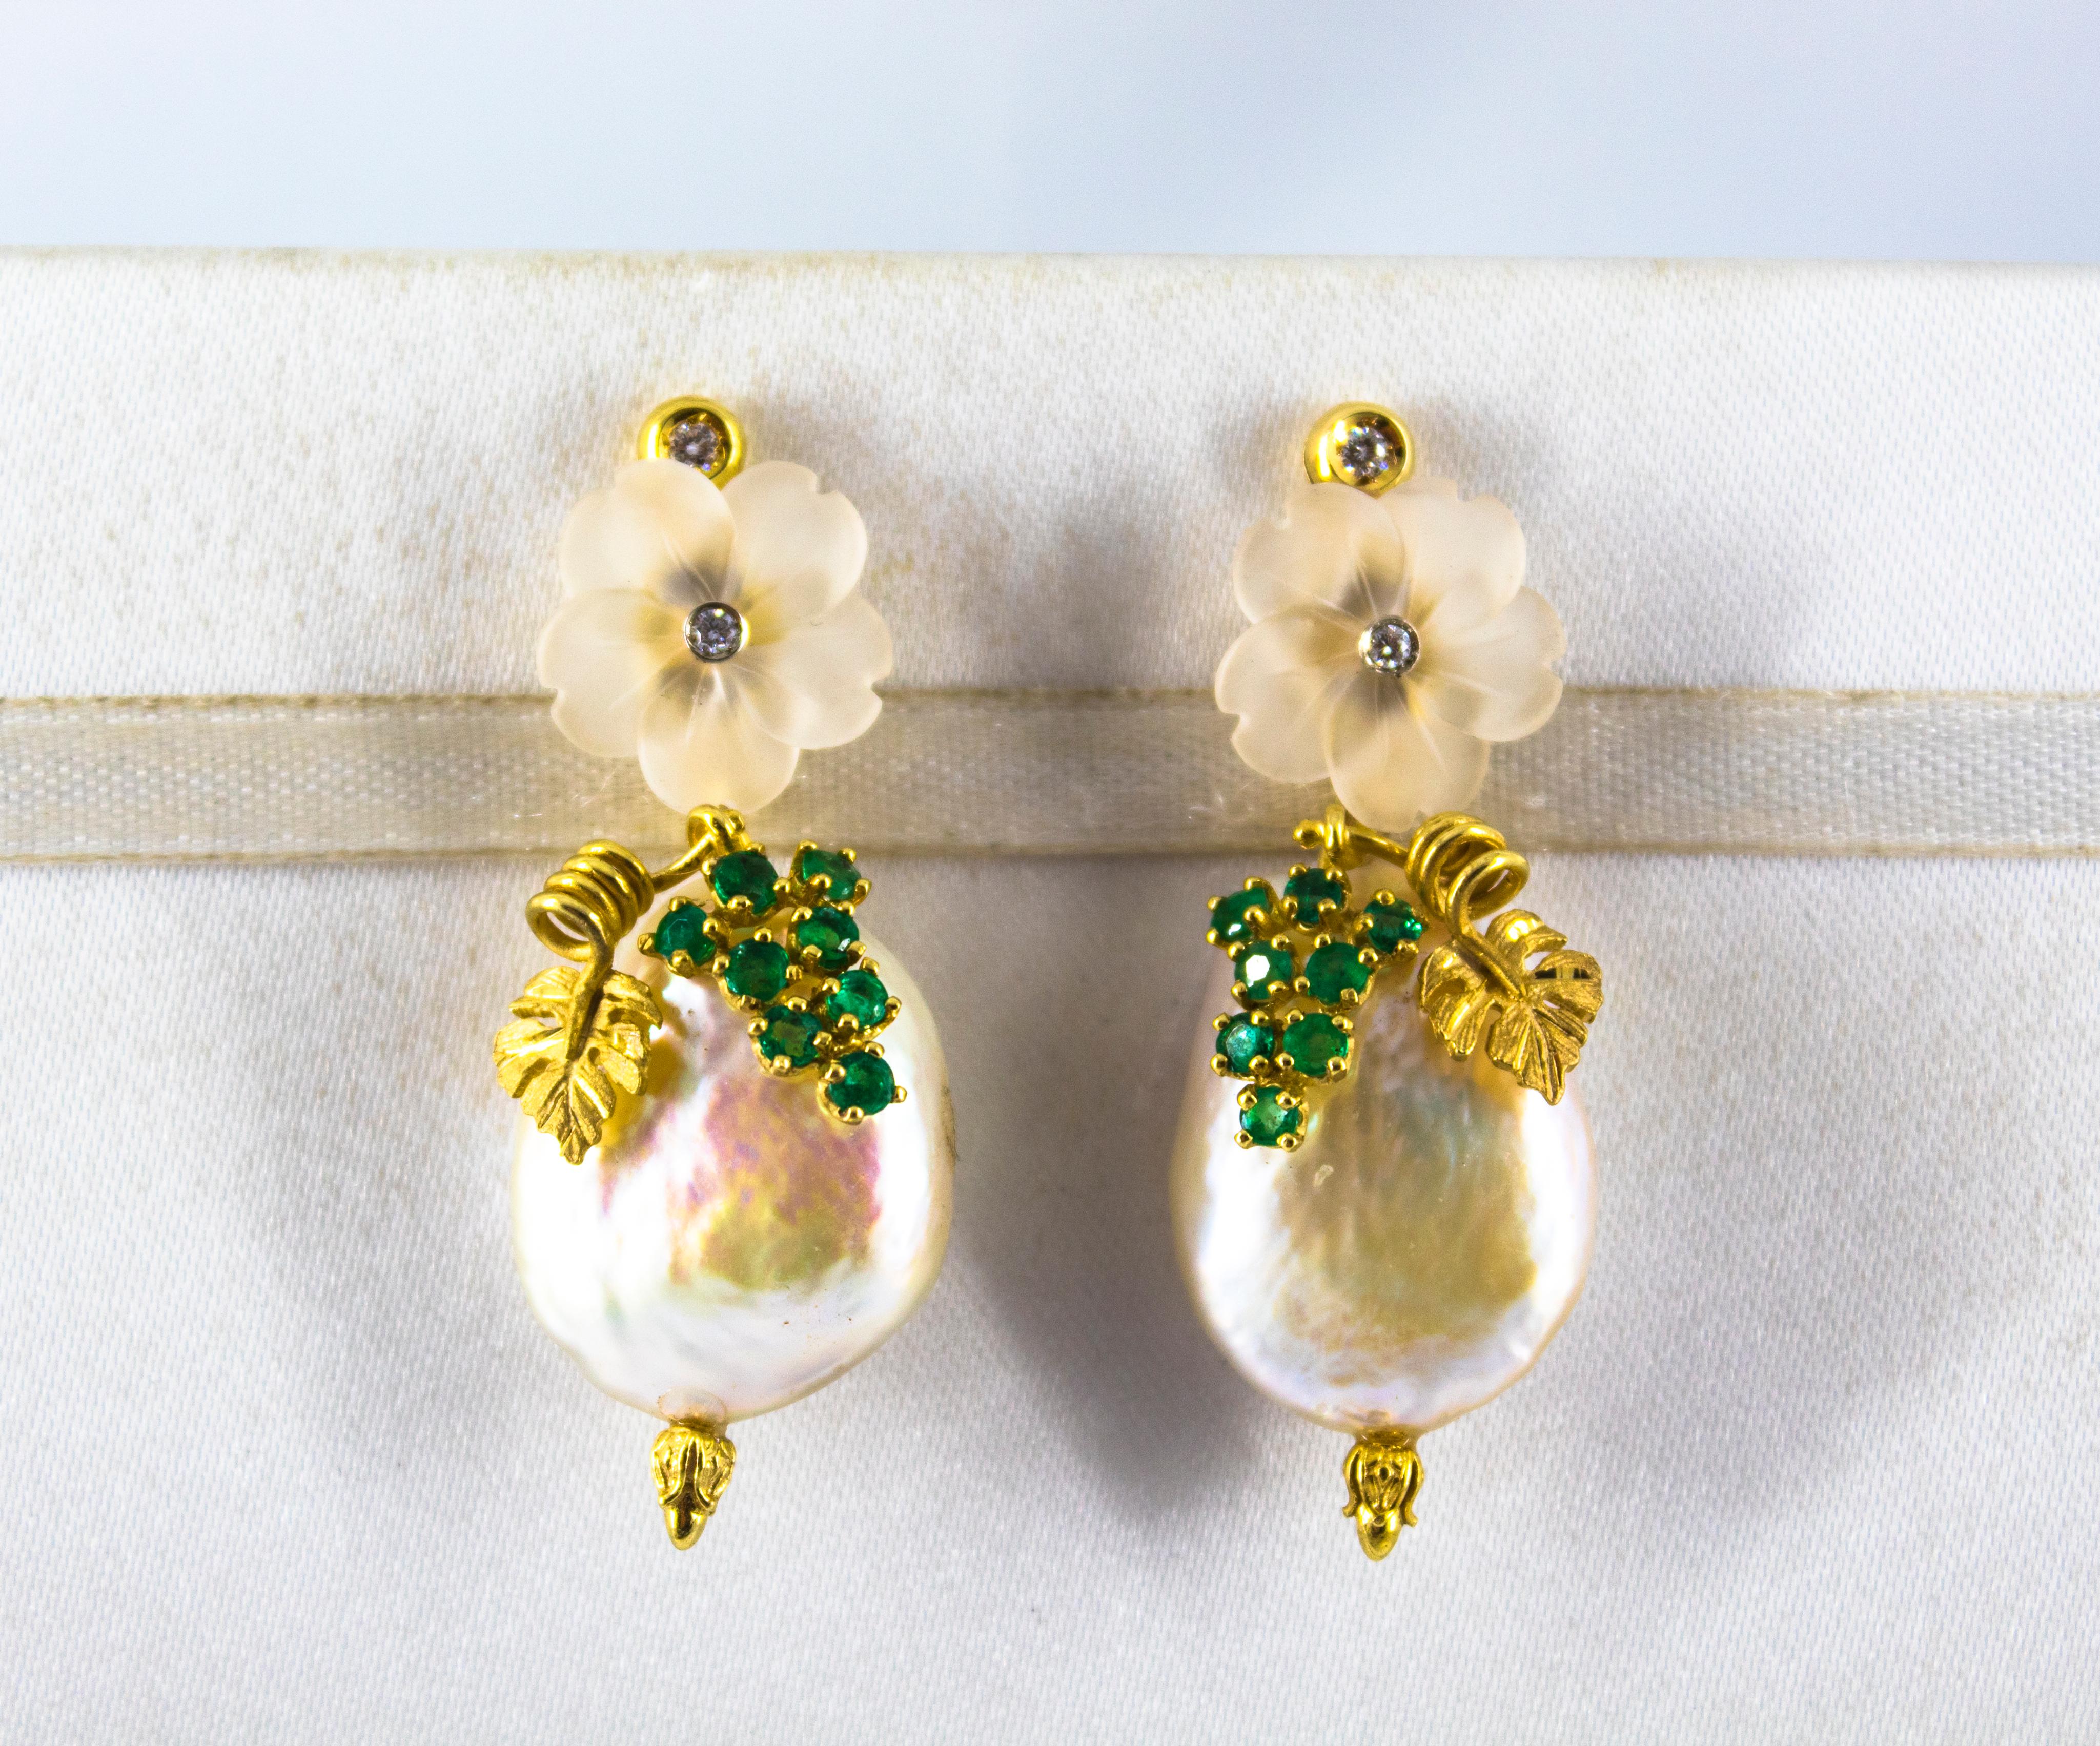 These Stud Earrings are made of 14K Yellow Gold.
These Earrings have 0.12 Carats of White Diamonds.
These Earrings have 0.90 Carats of Emeralds.
These Earrings have also Pearls and Rock Crystal.
These Earrings are available also with Green Flowers